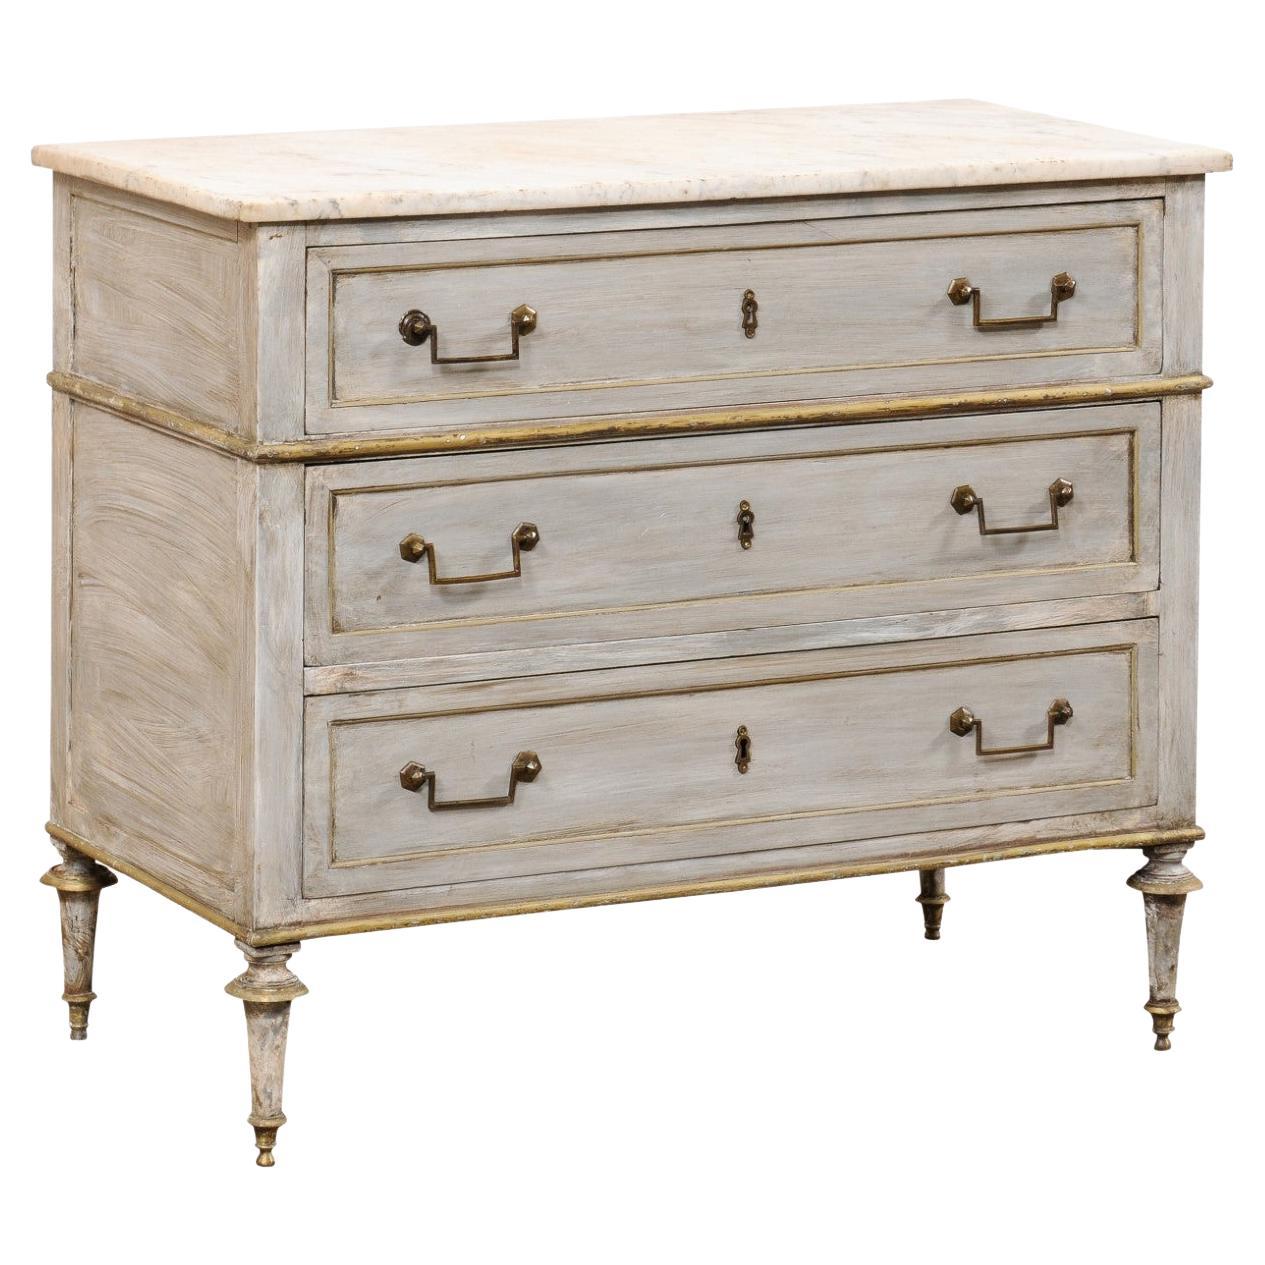 French Neoclassical Commode w/Marble Top & Brass Accents, Early 19th C.